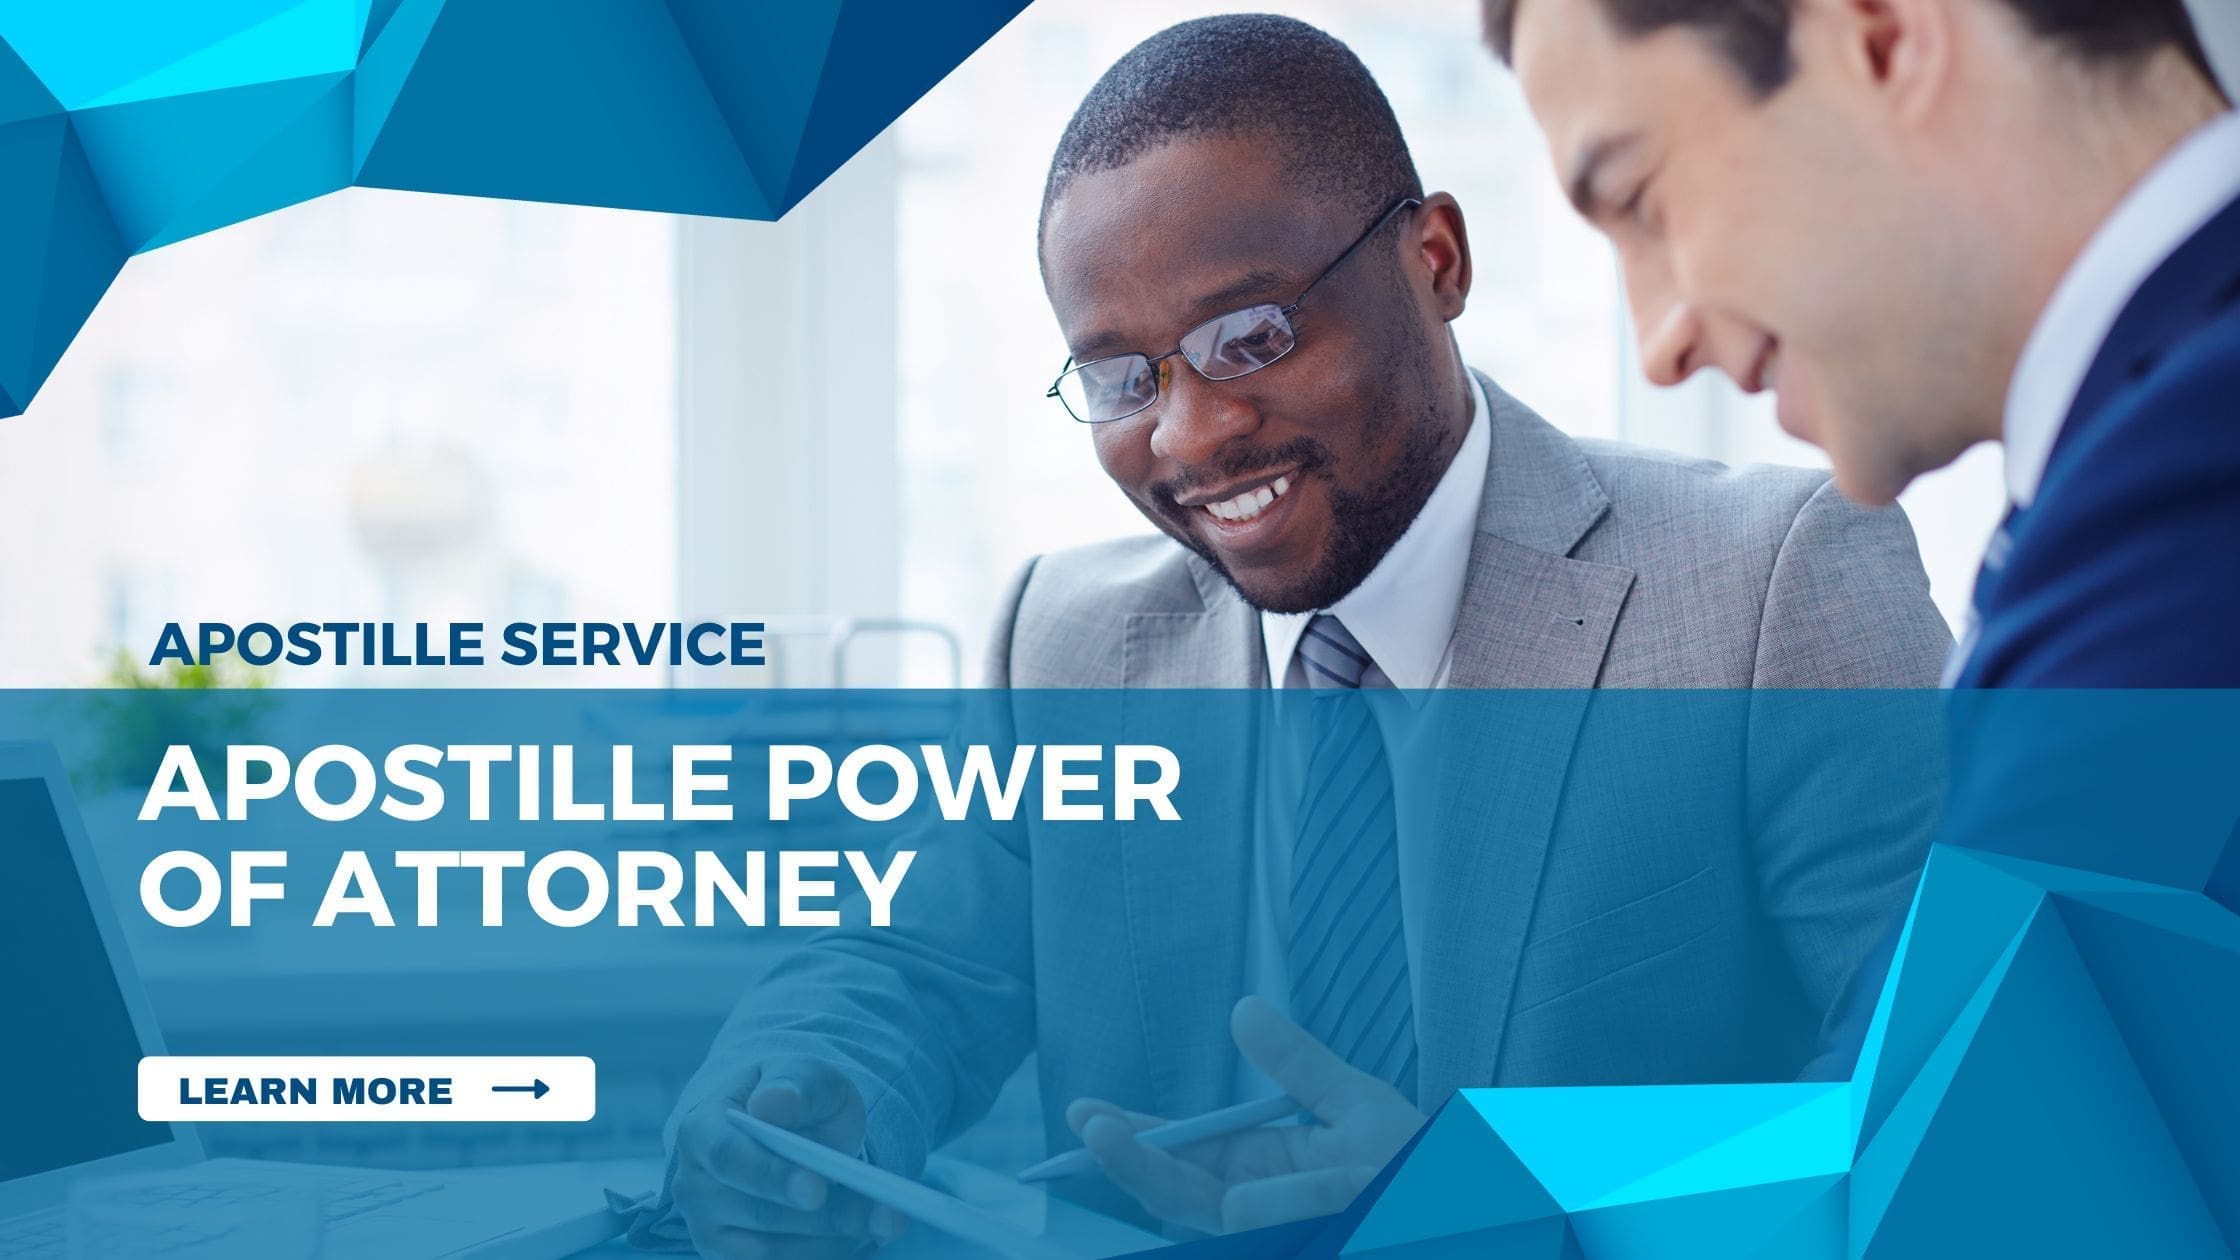 How To Apostille Power Of Attorney Global Apostille Experts Fast Trusted Document 7088